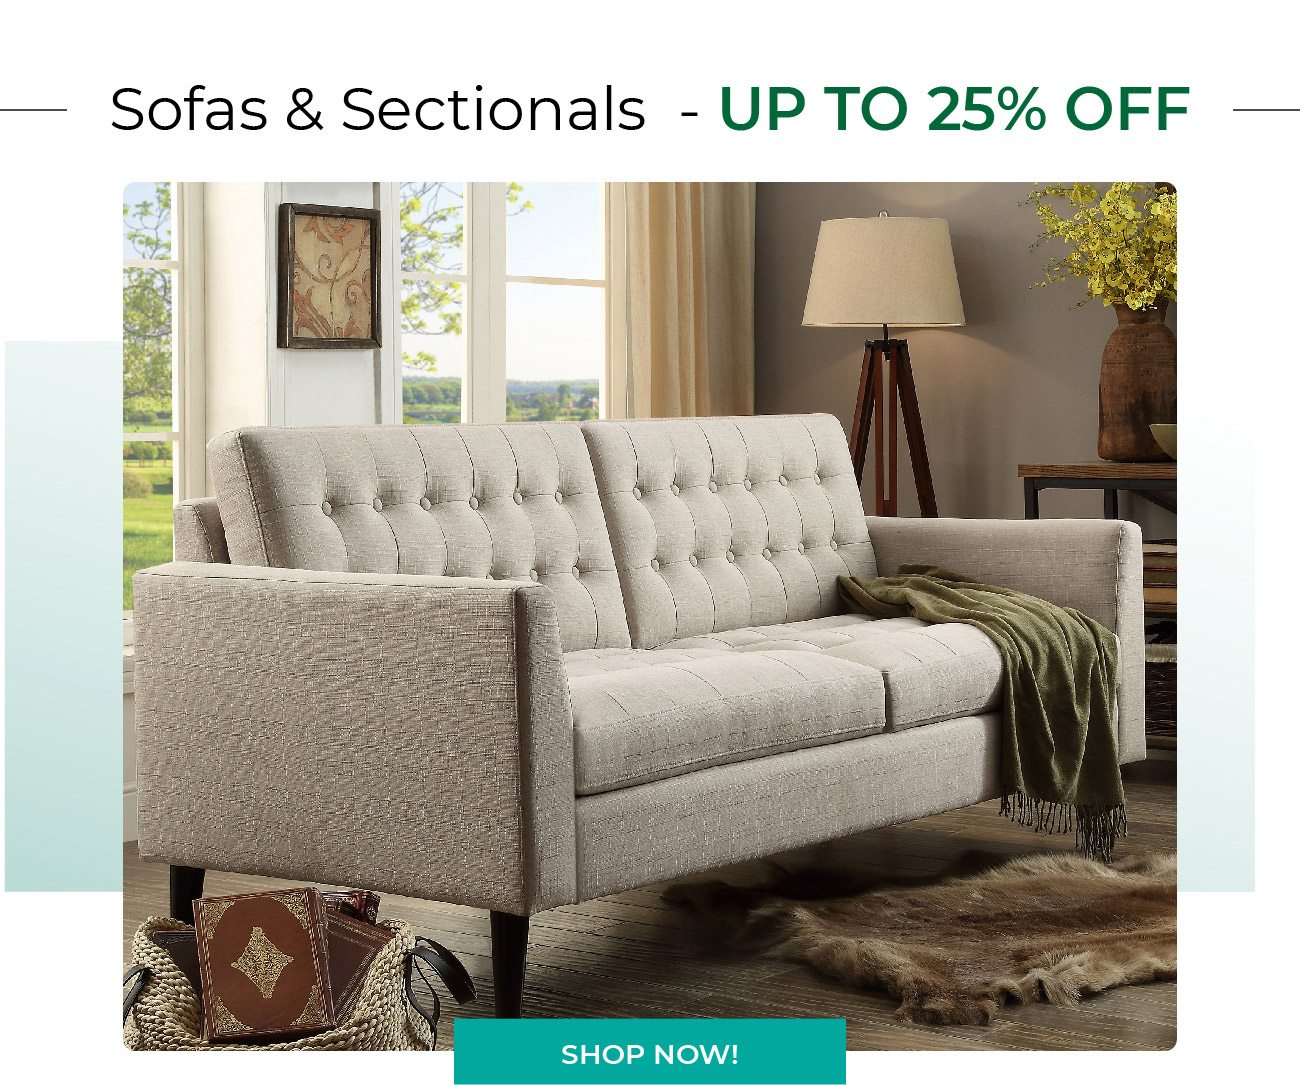 Sofas & Sectionals - Up to 25% off